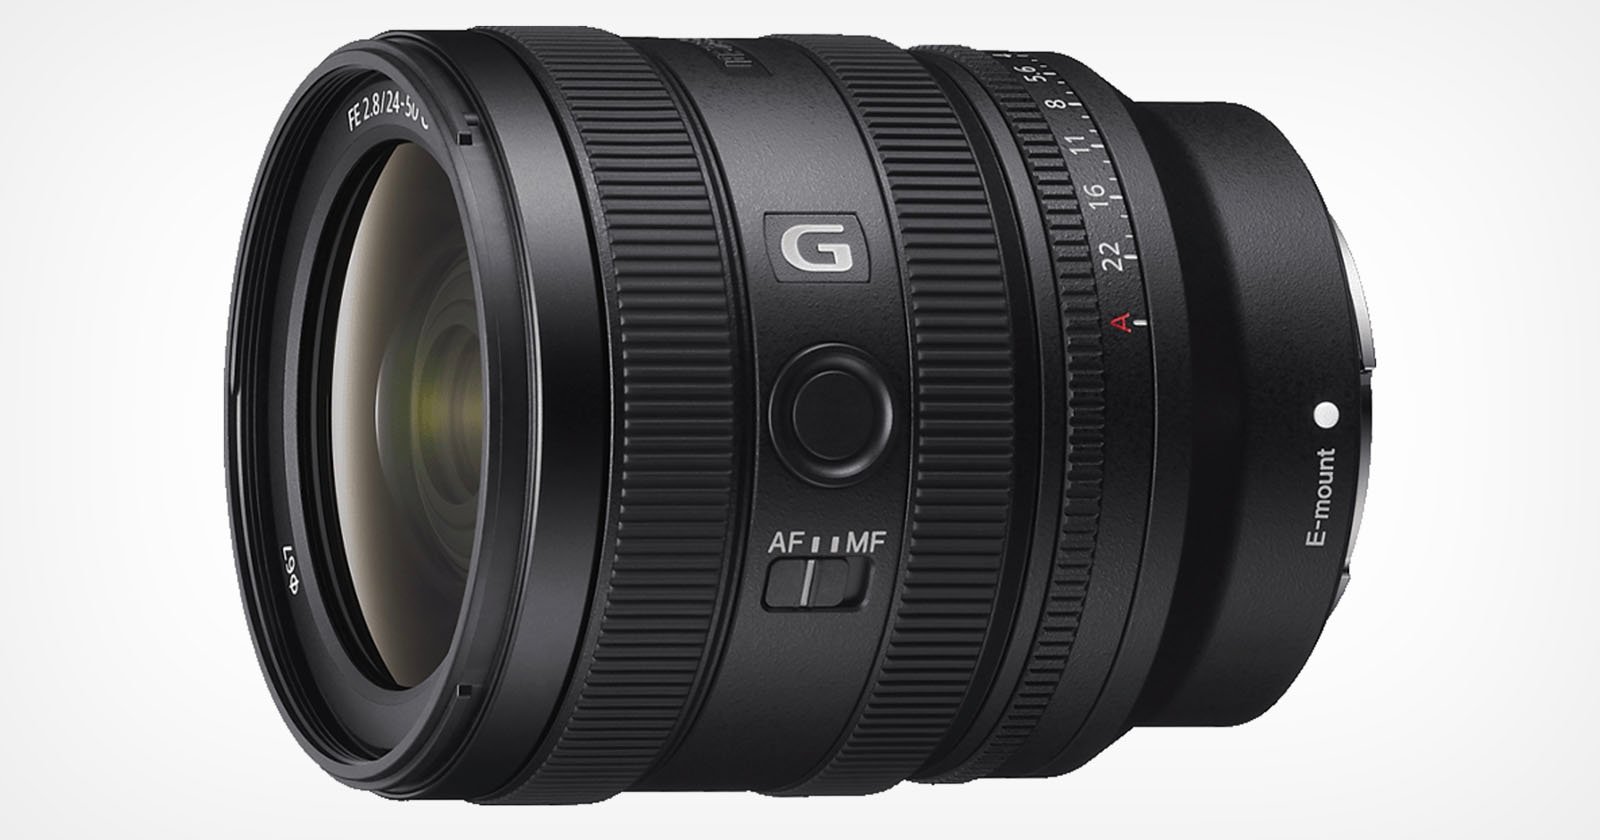 Sonys New FE 24-50mm f/2.8 G Lens is Compact, Light, and Fast